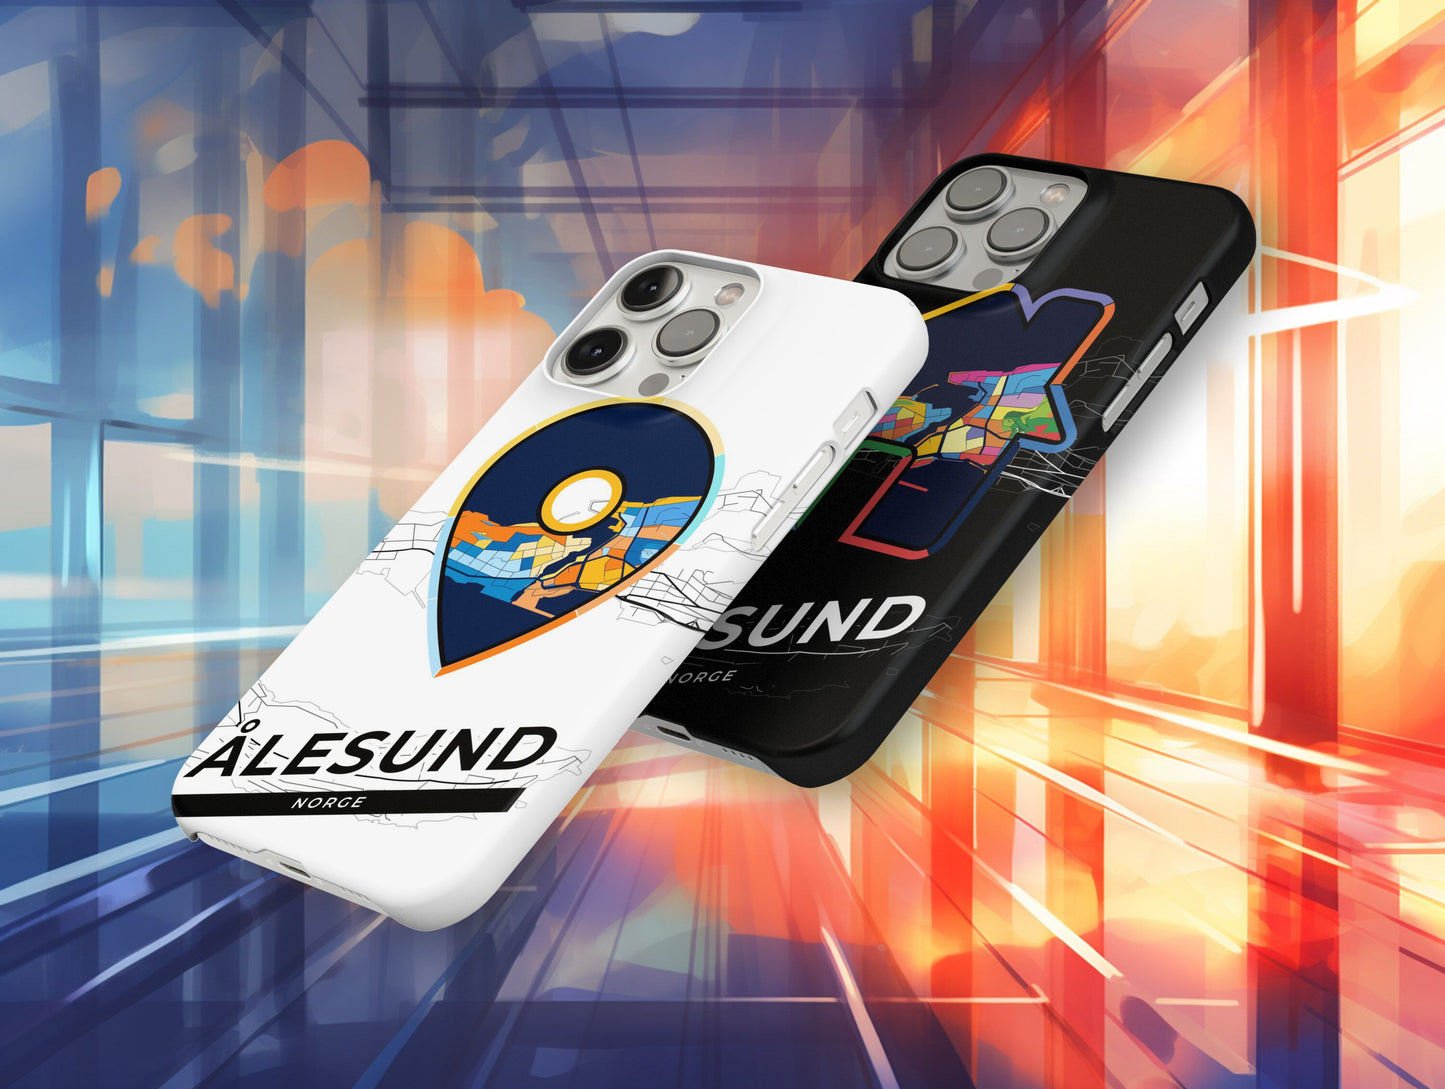 Ålesund Norway slim phone case with colorful icon. Birthday, wedding or housewarming gift. Couple match cases.